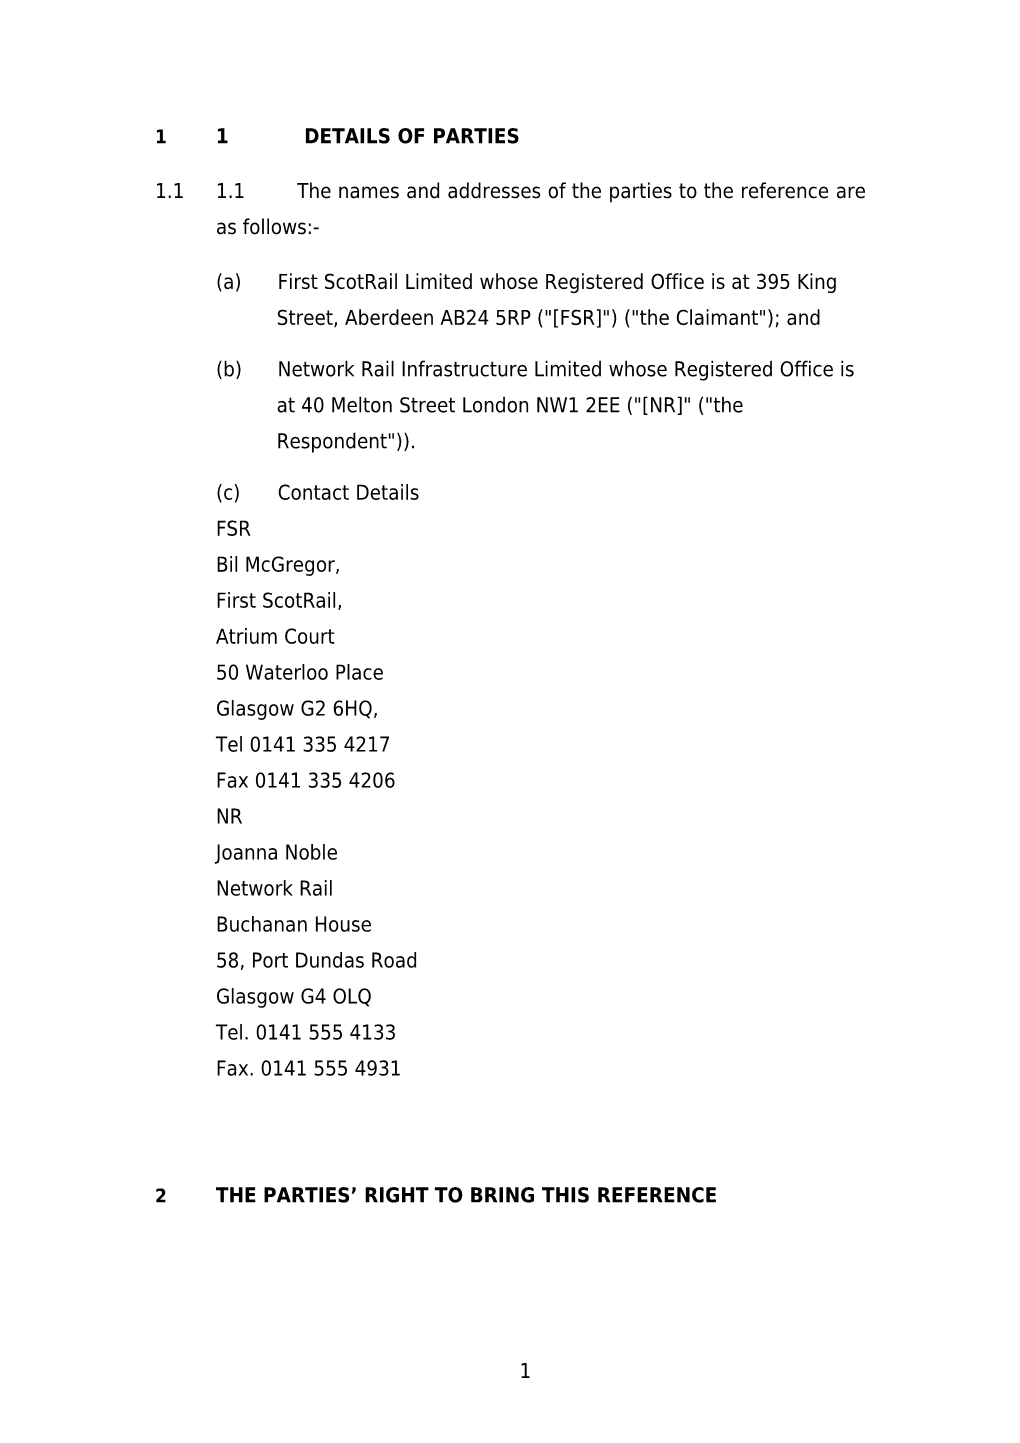 1.11.1The Names and Addresses of the Parties to the Reference Are As Follows